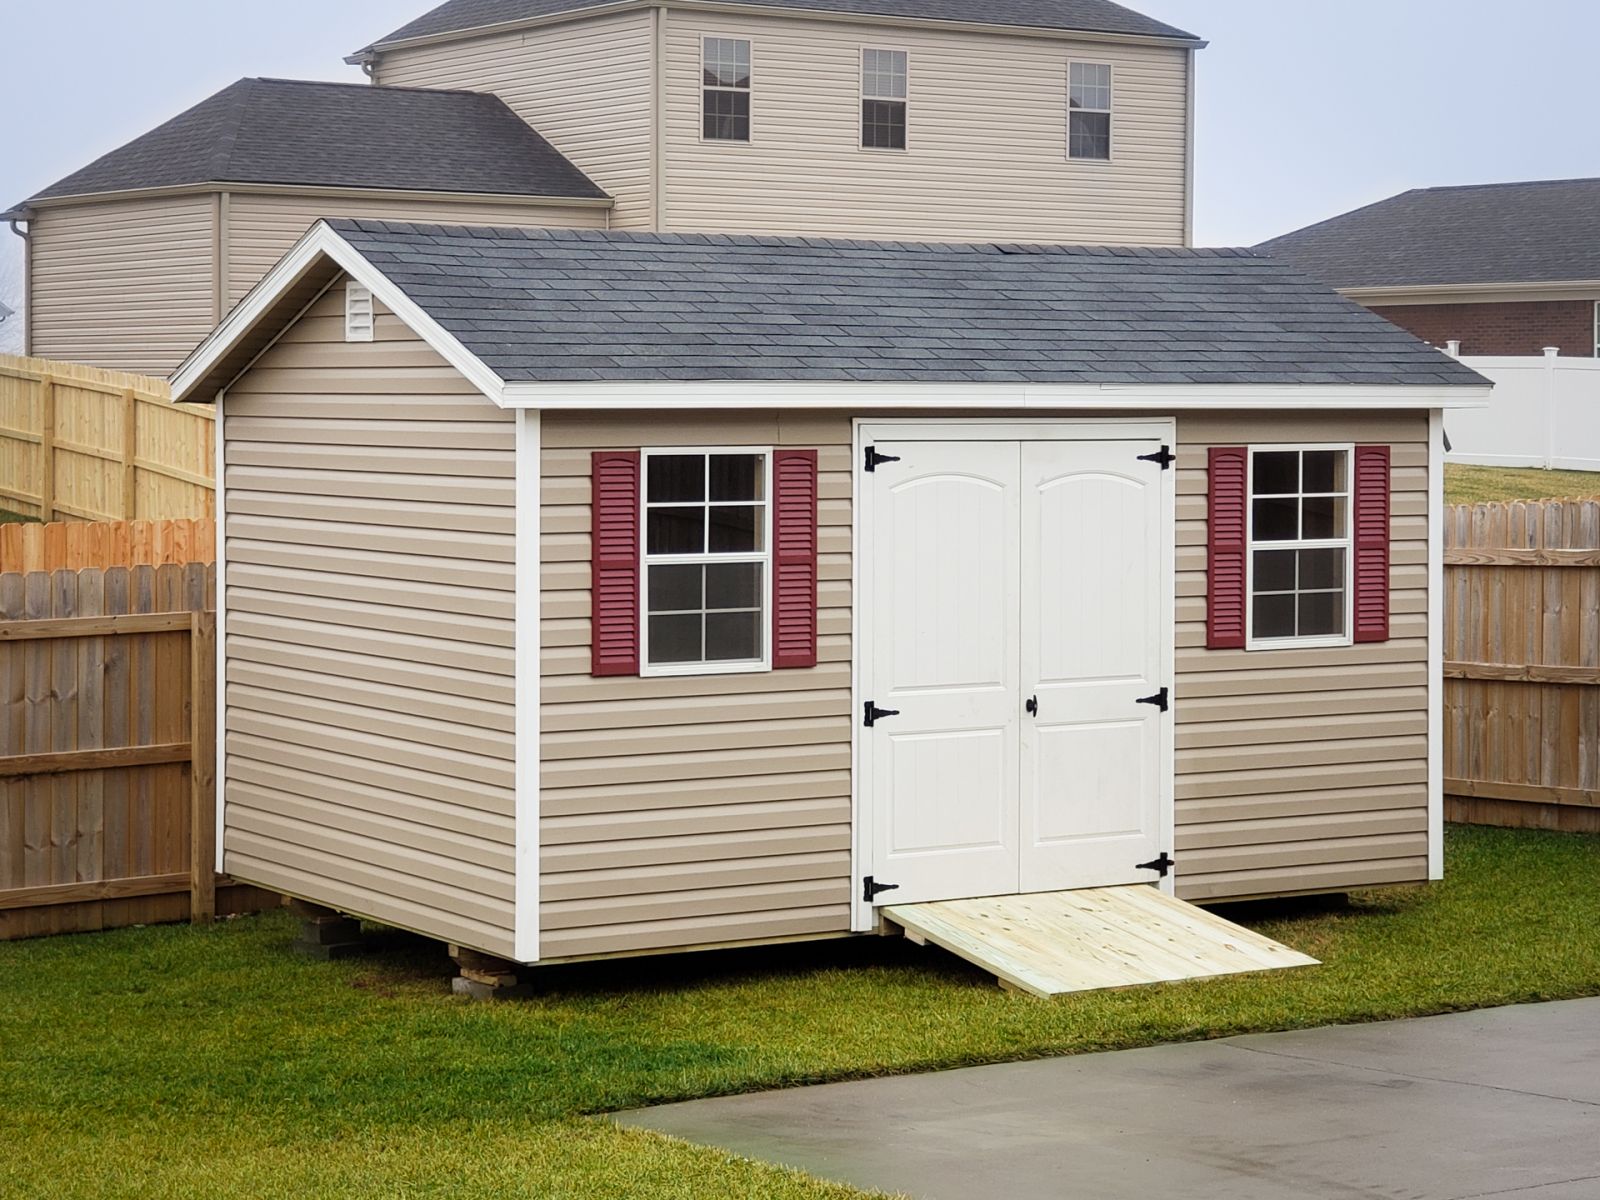 A garden shed in Tennessee with vinyl siding, double doors, and windows with shutters